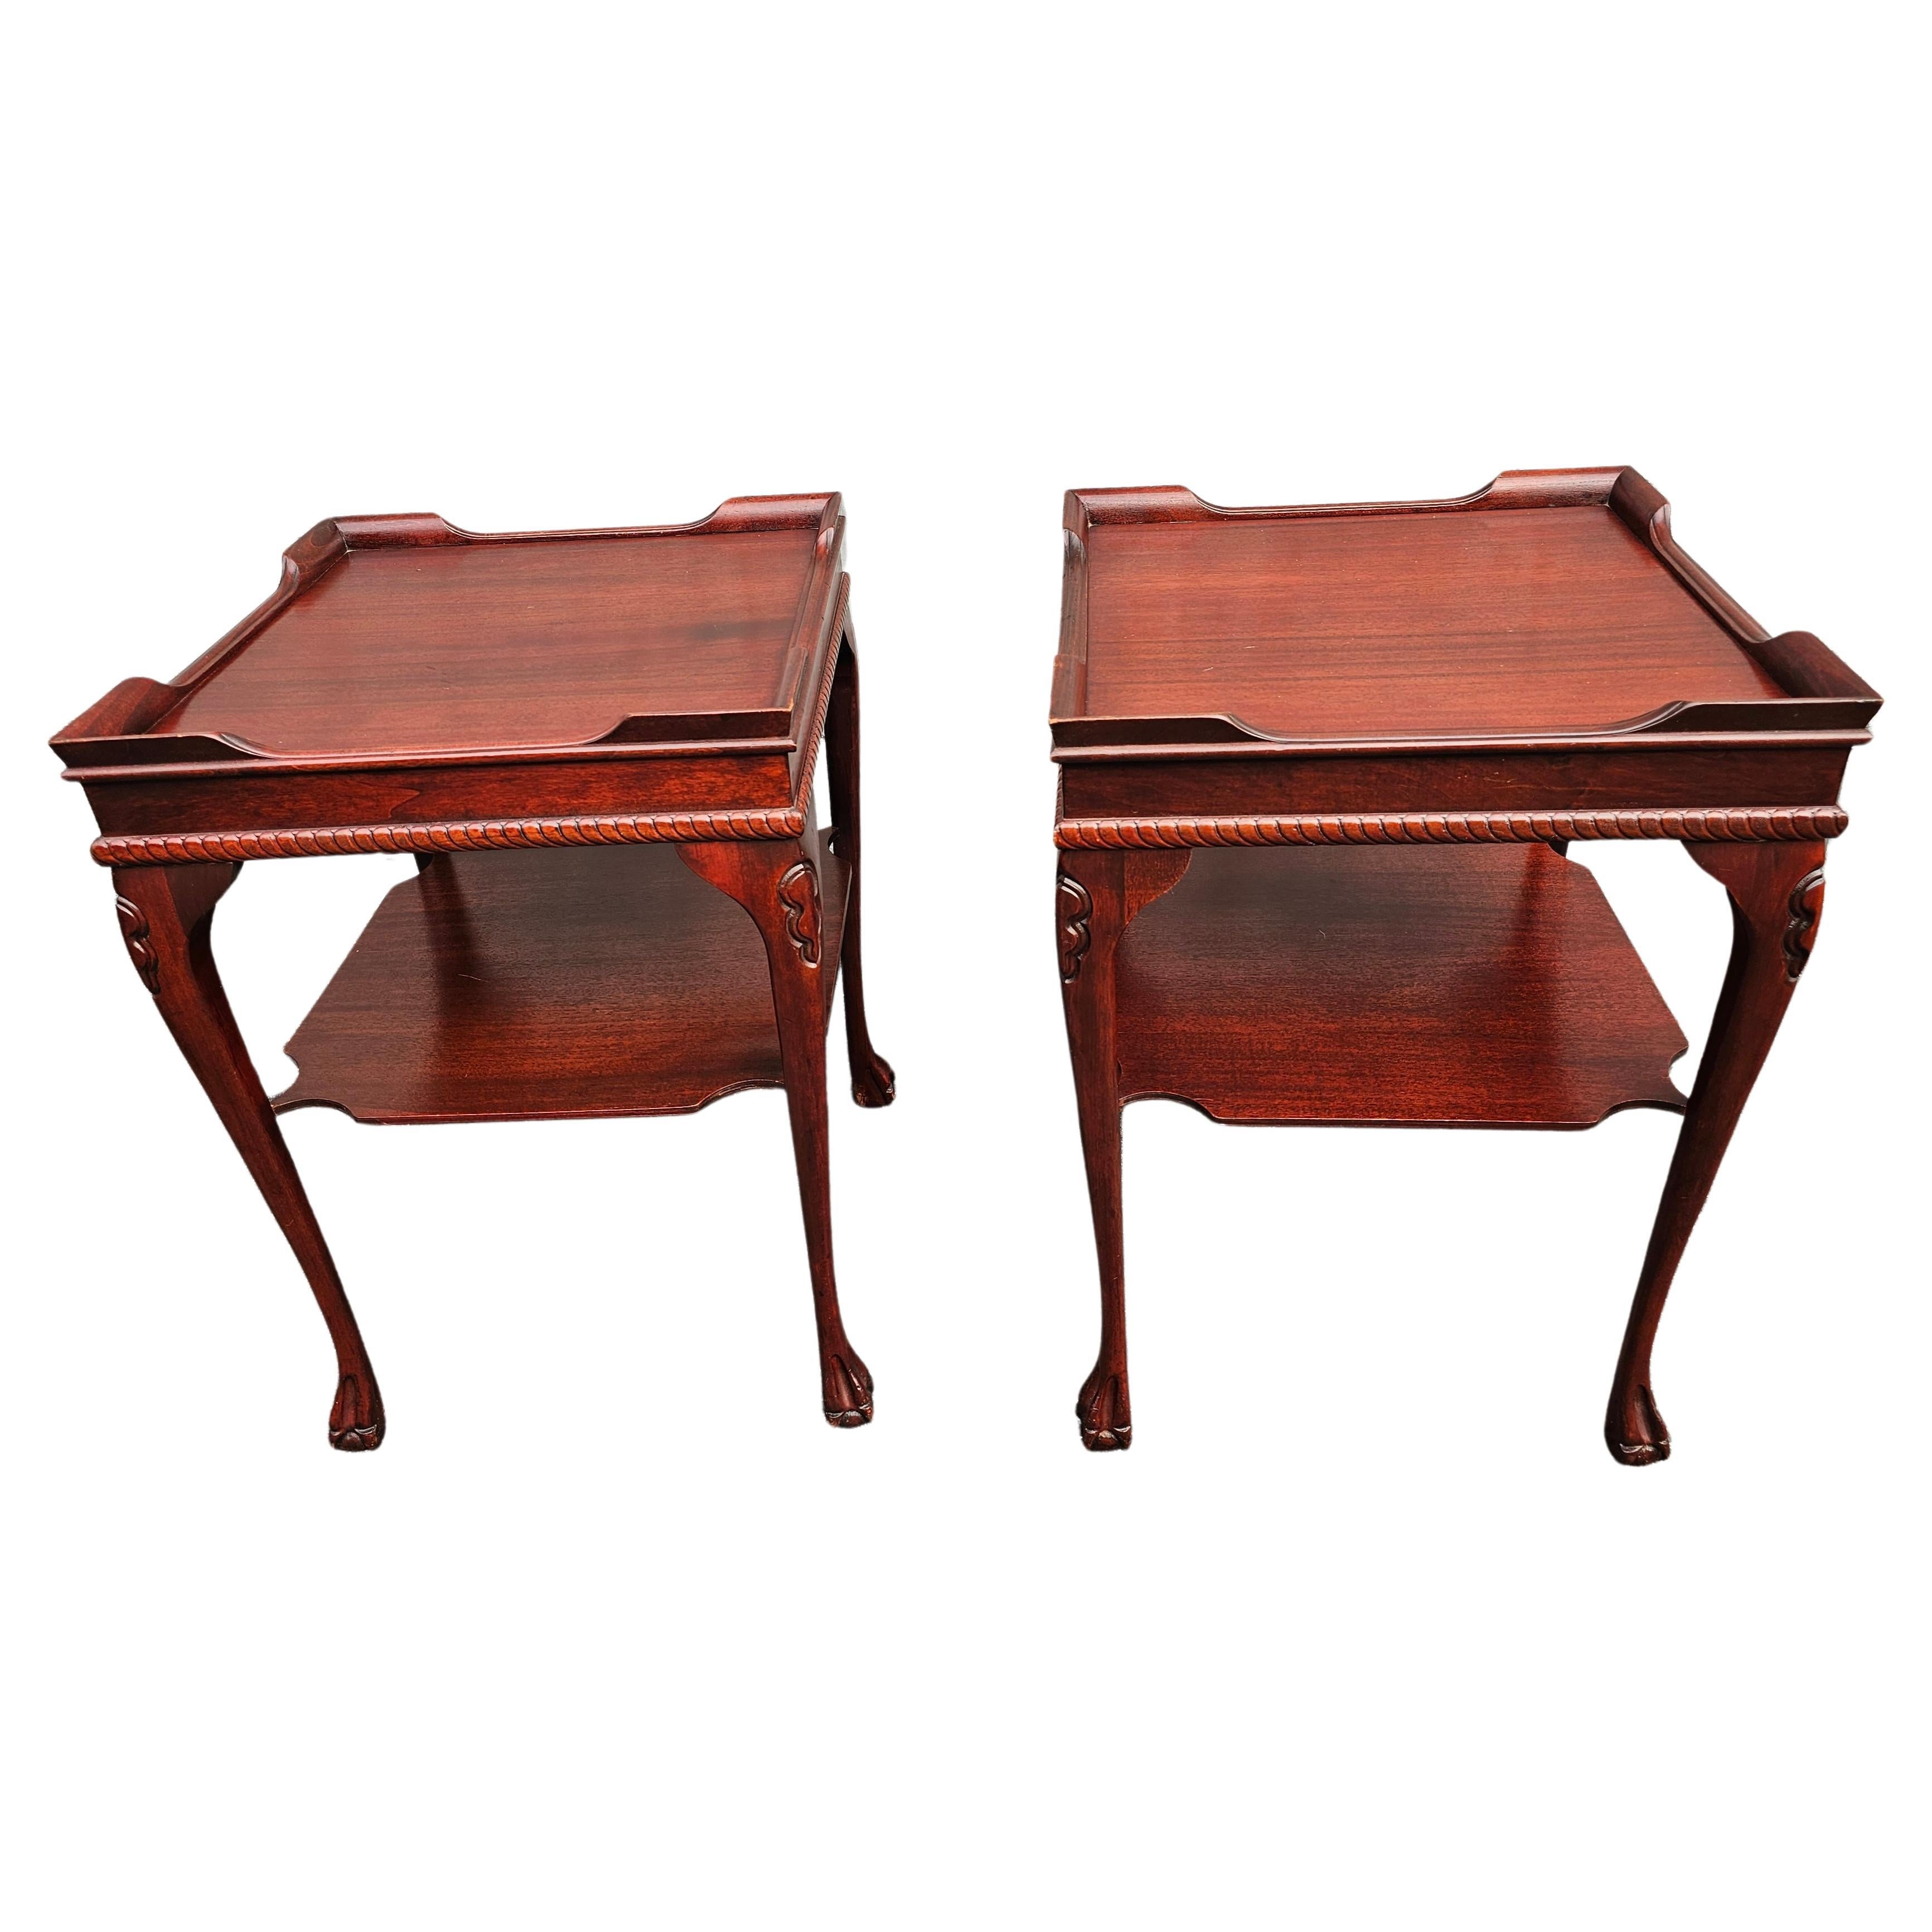 Pair of Mid-Century Chippendale Style Mahogany tiered Side Tables with corner galleries. 
Light weight Solid mahogany. Measure 19.25